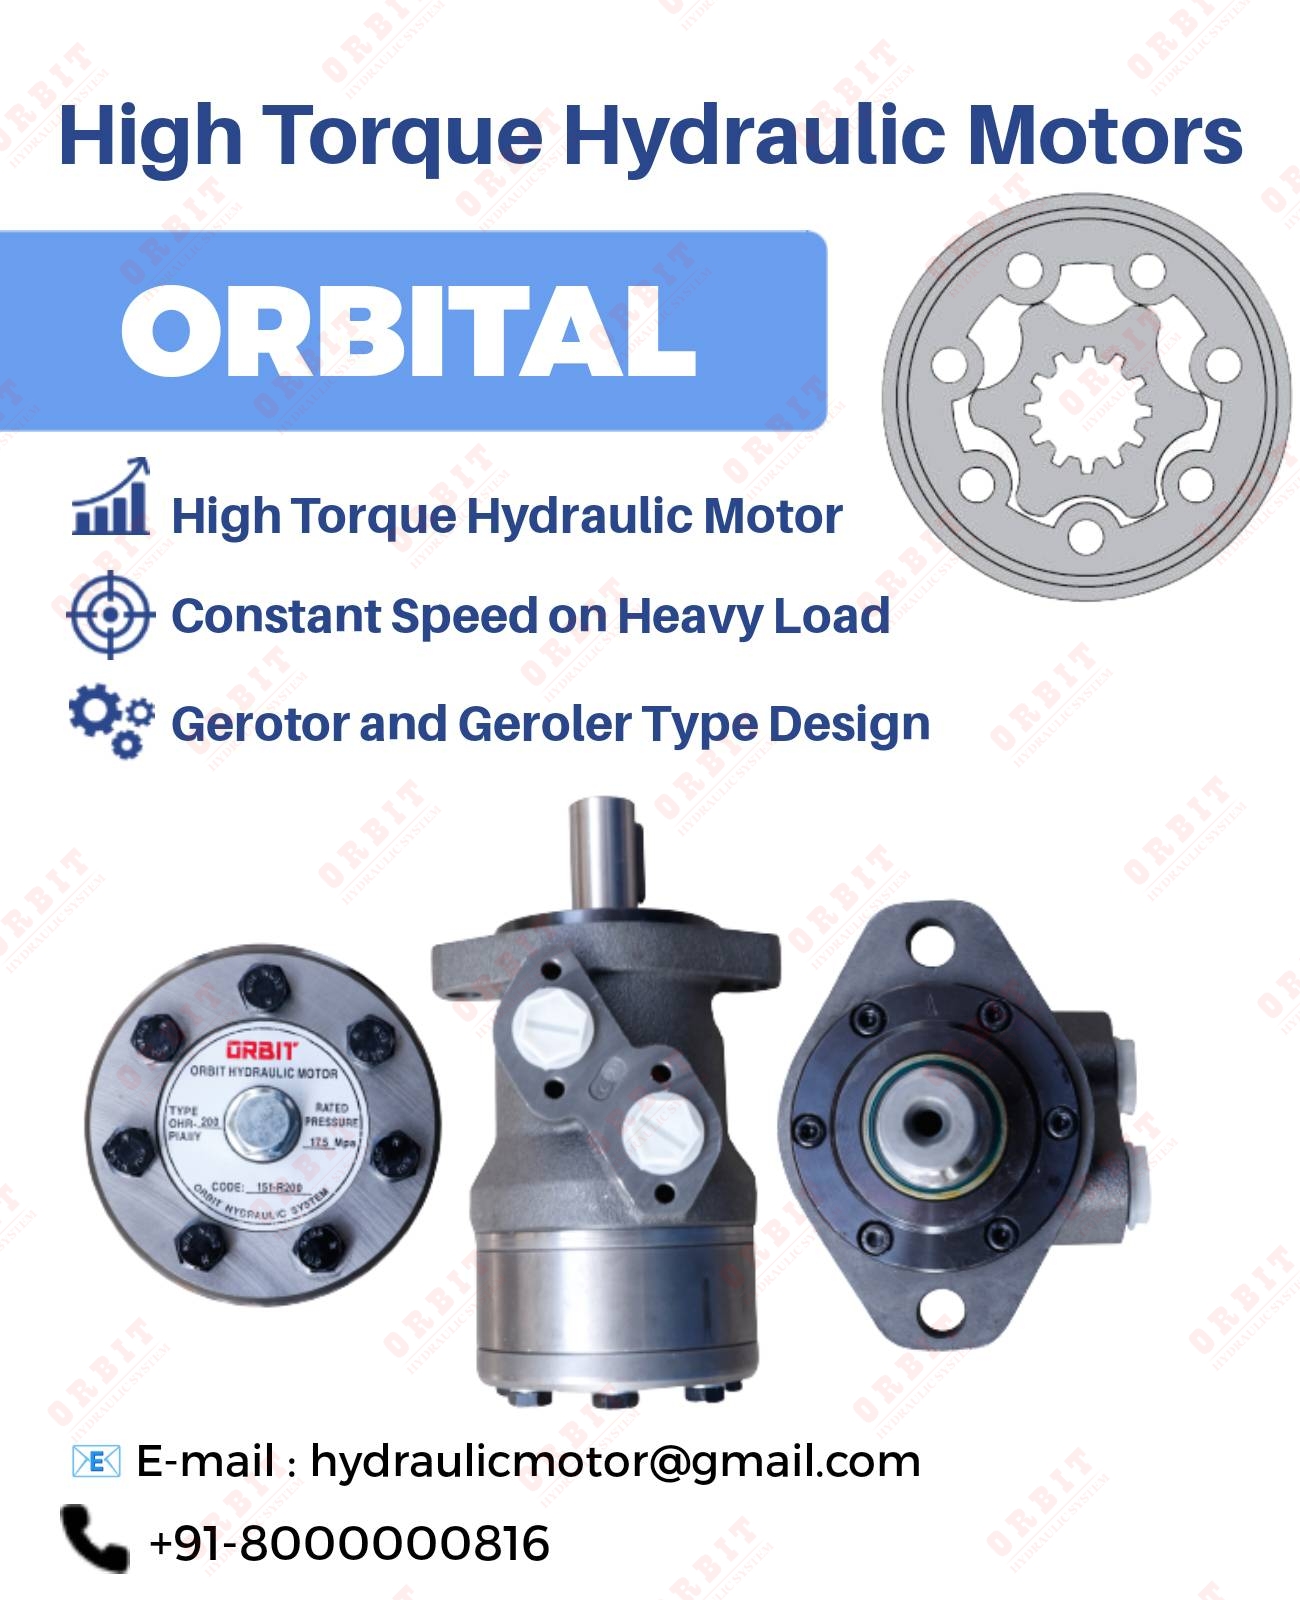 OMS - White Hydraulic Motor for Construction Equipment Application